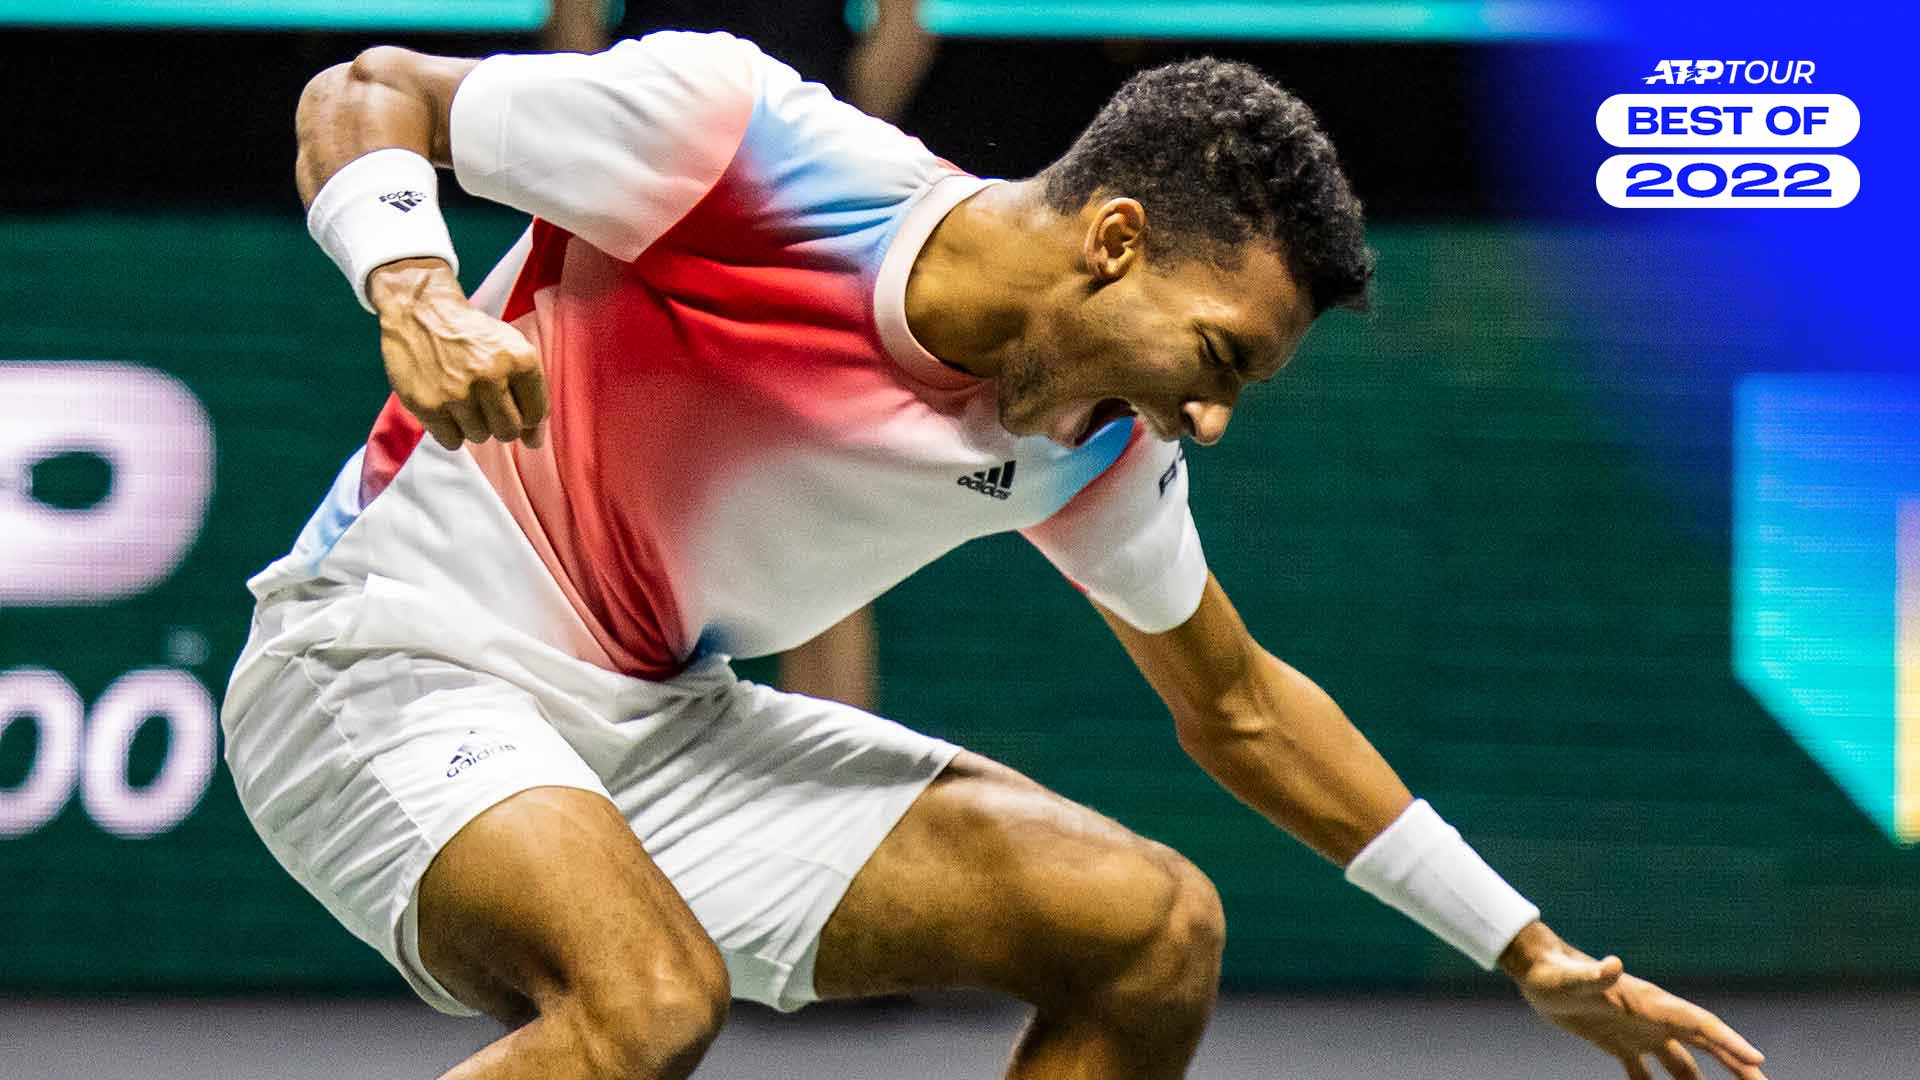 Felix Auger-Aliassime celebrates winning his maiden ATP Tour title in February at the ABN AMRO Open in Rotterdam.